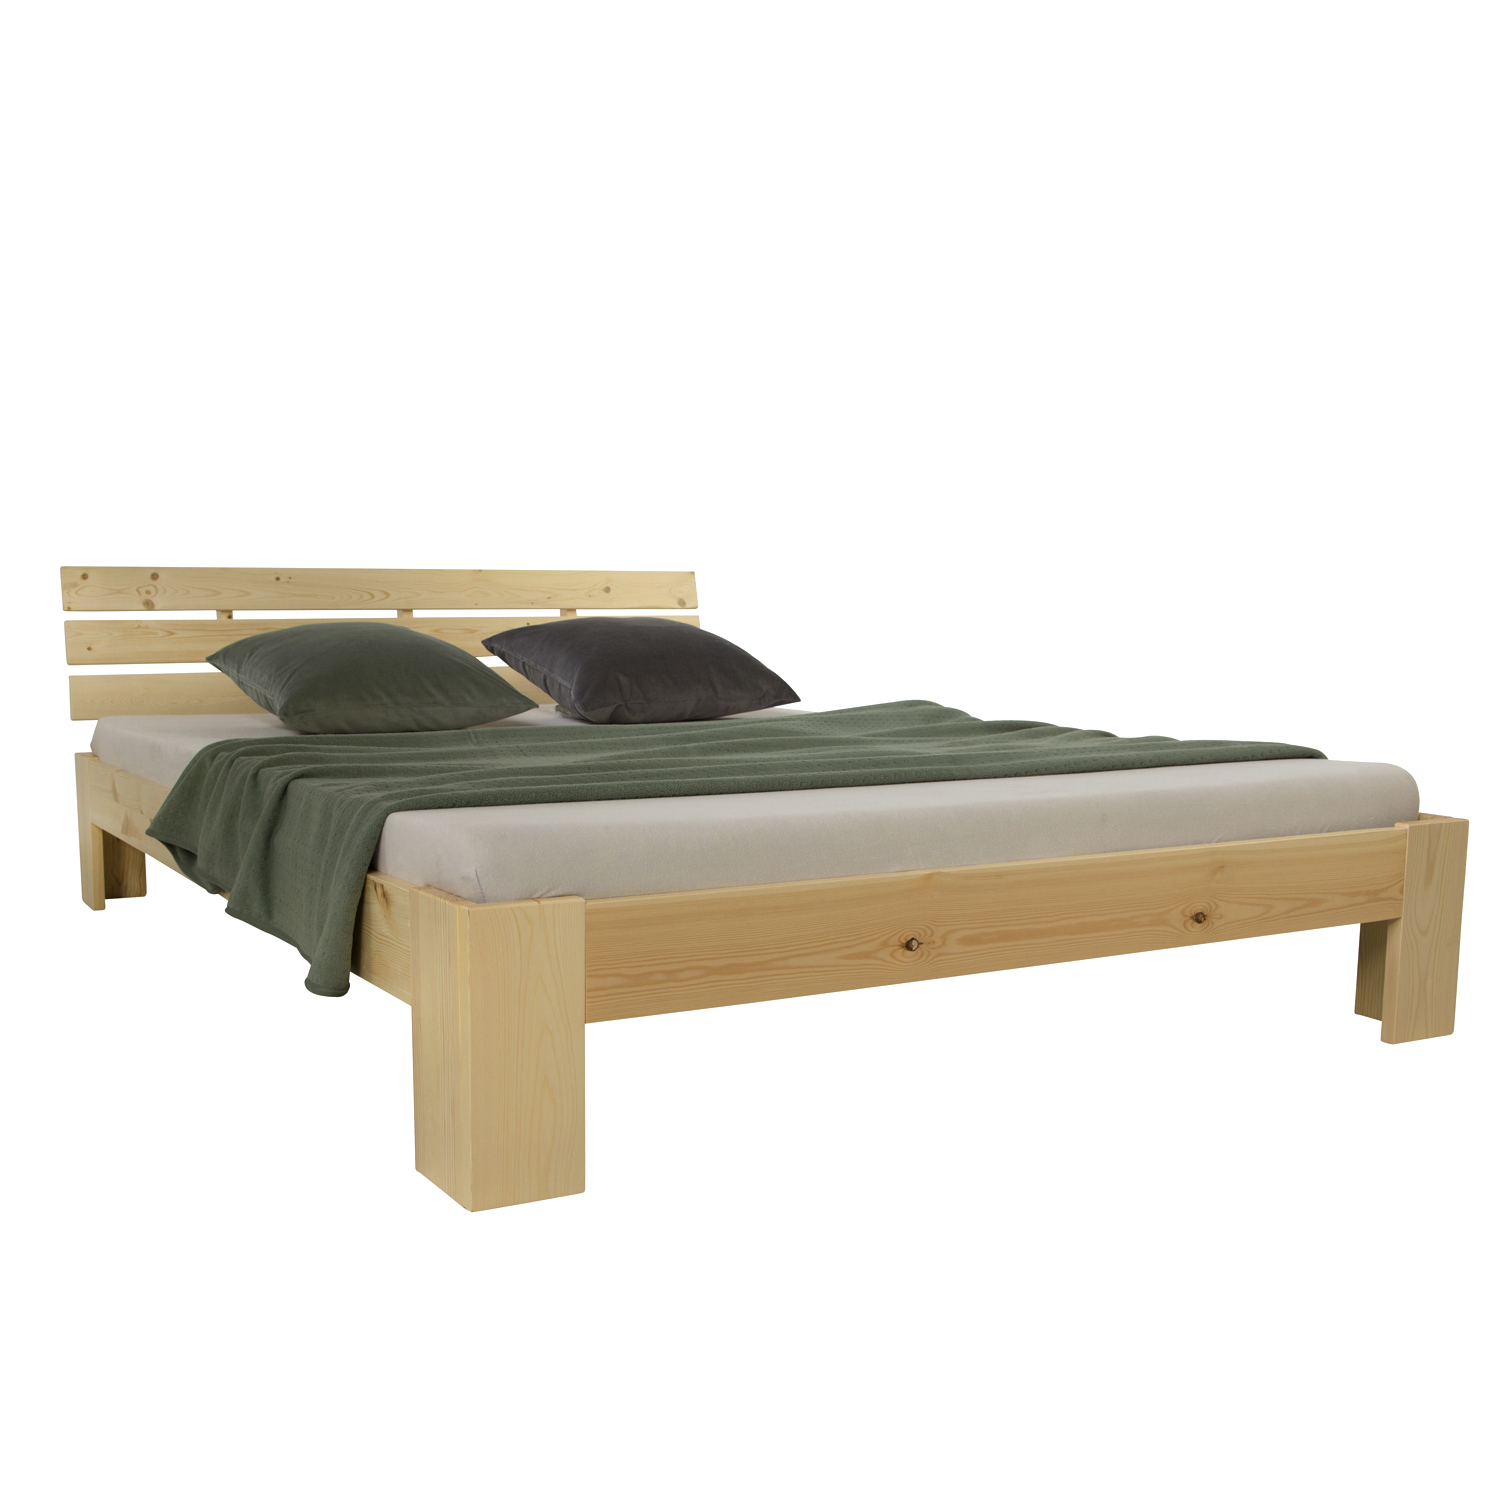 Double Bed Wooden Bed Futon Bed 120x200 cm Natural Pine Bed Frame Solid Wood